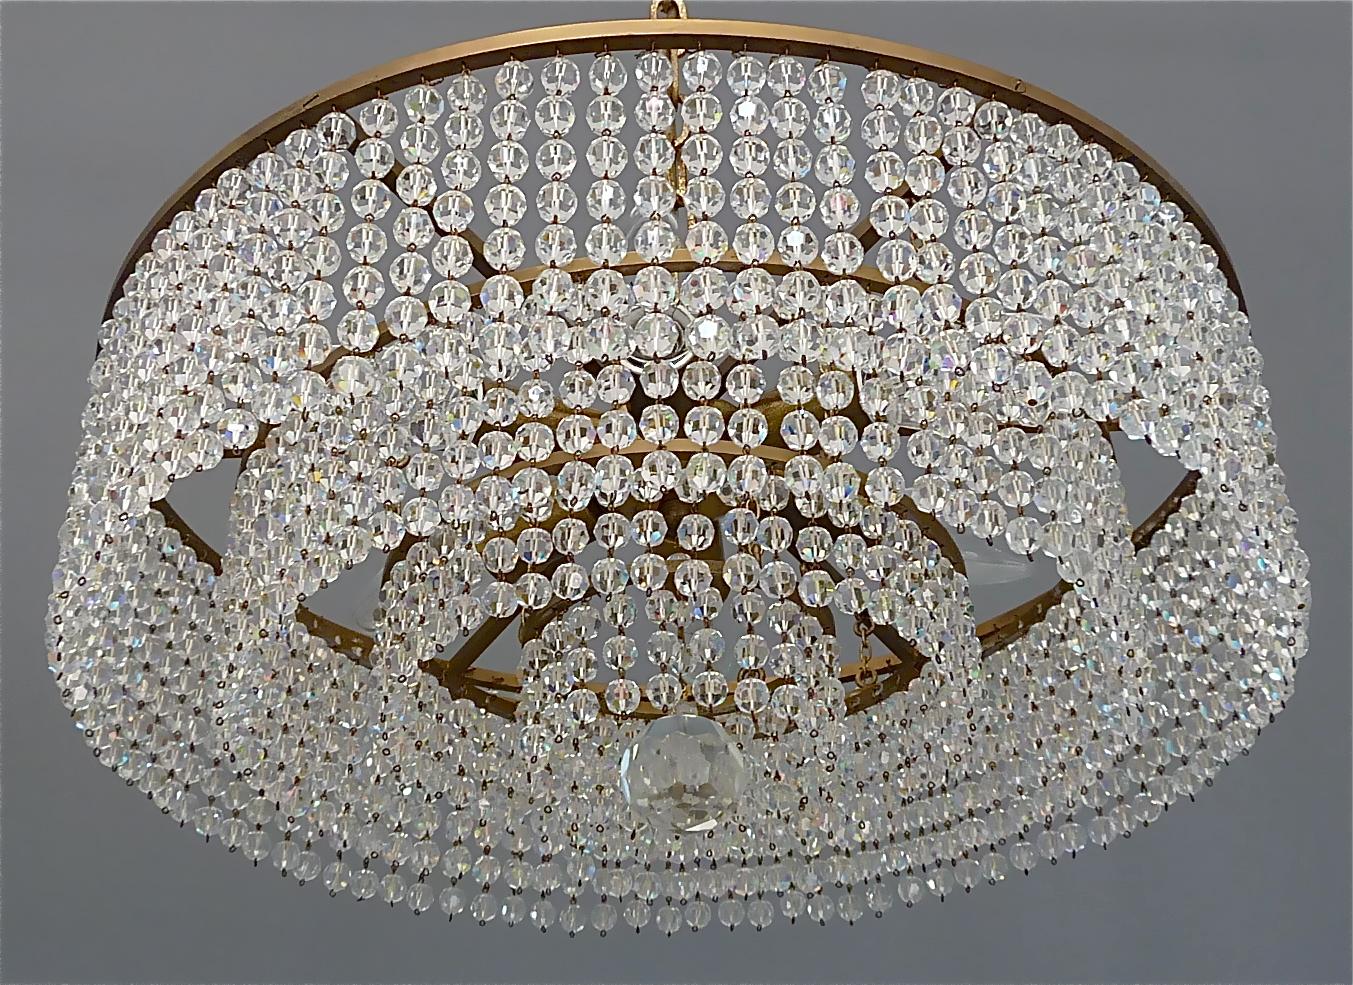 Faceted Lobmeyr Crystal Glass String Chandelier Patinated Brass Austria 1950s, No.2 of 2 For Sale